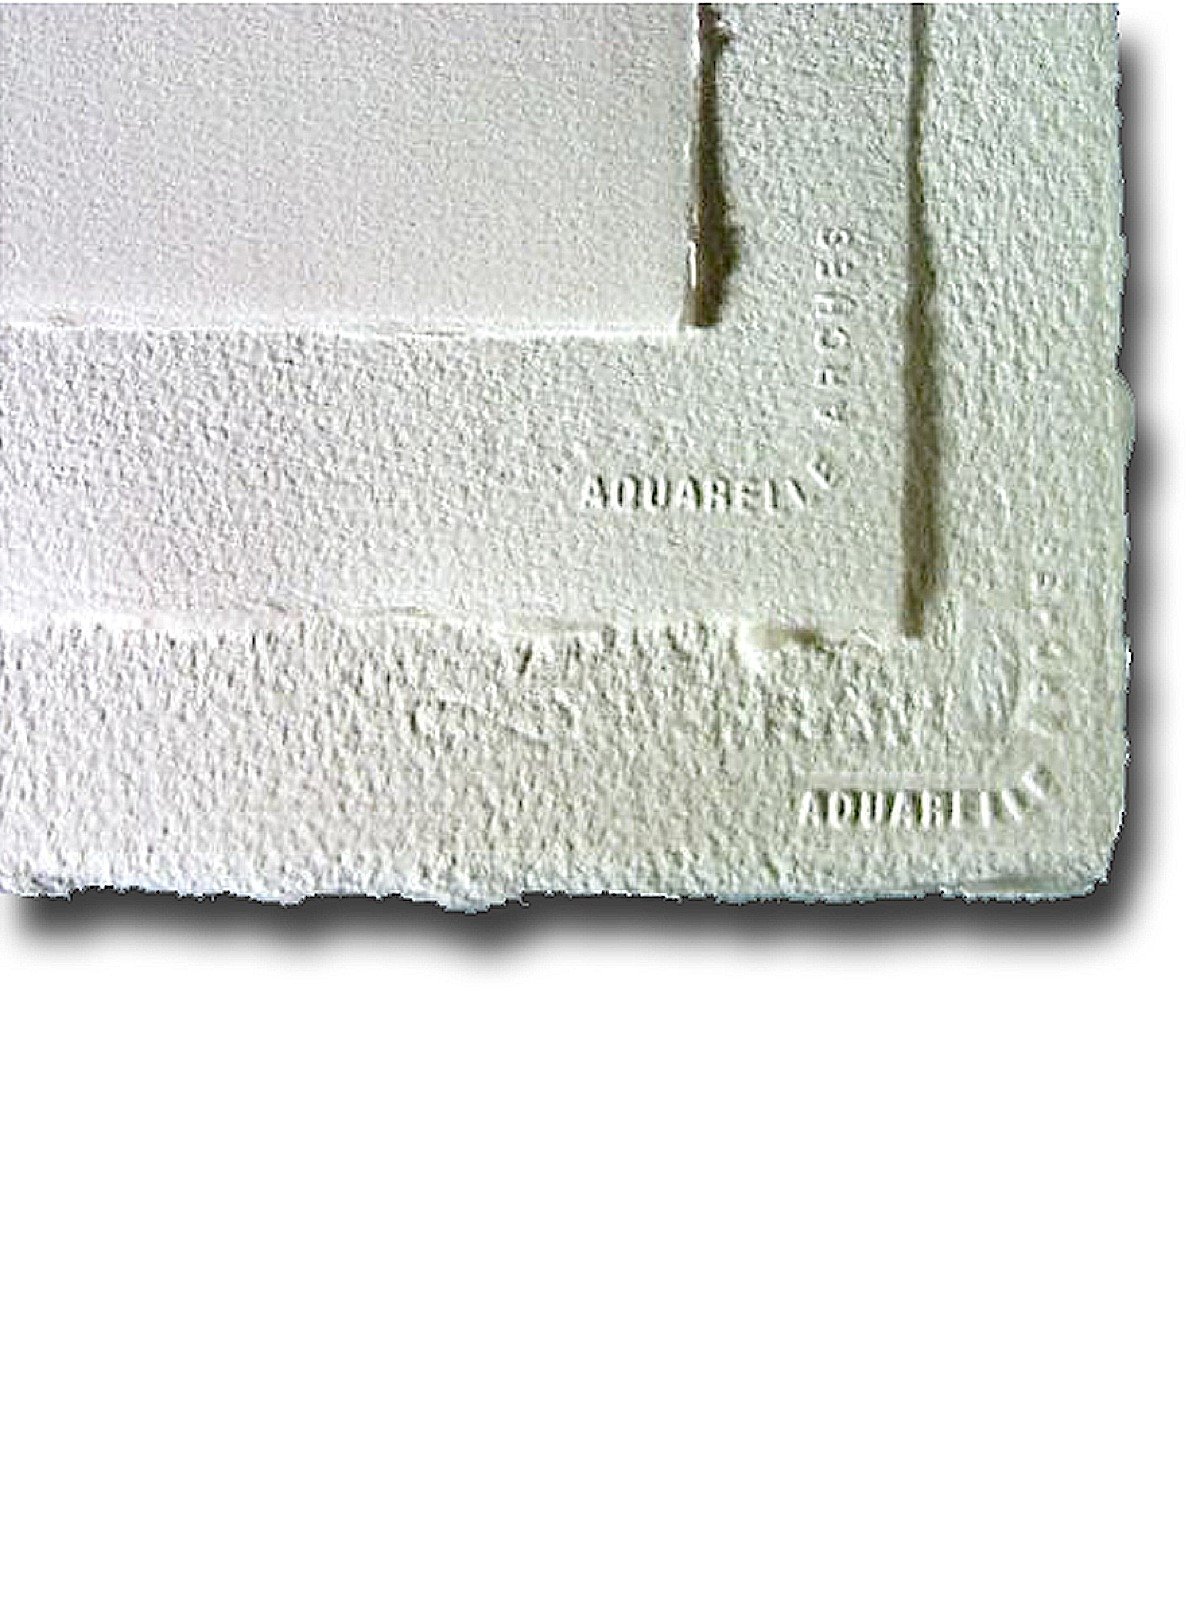 Watercolor paper gone bad? Sizing surface coating problems Arches